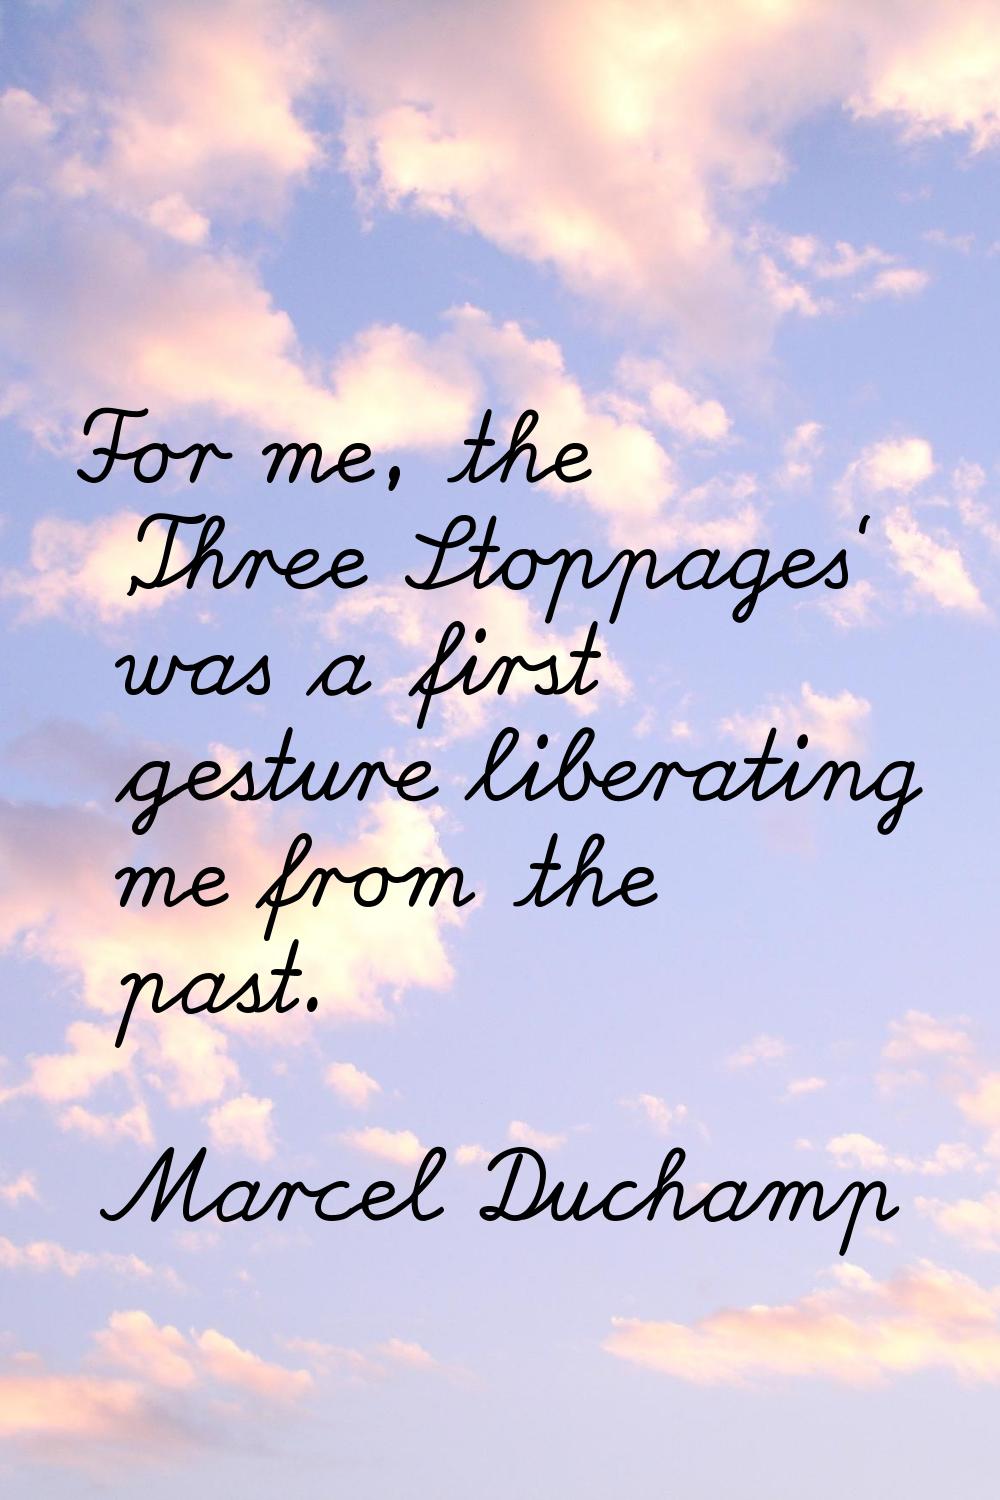 For me, the 'Three Stoppages' was a first gesture liberating me from the past.